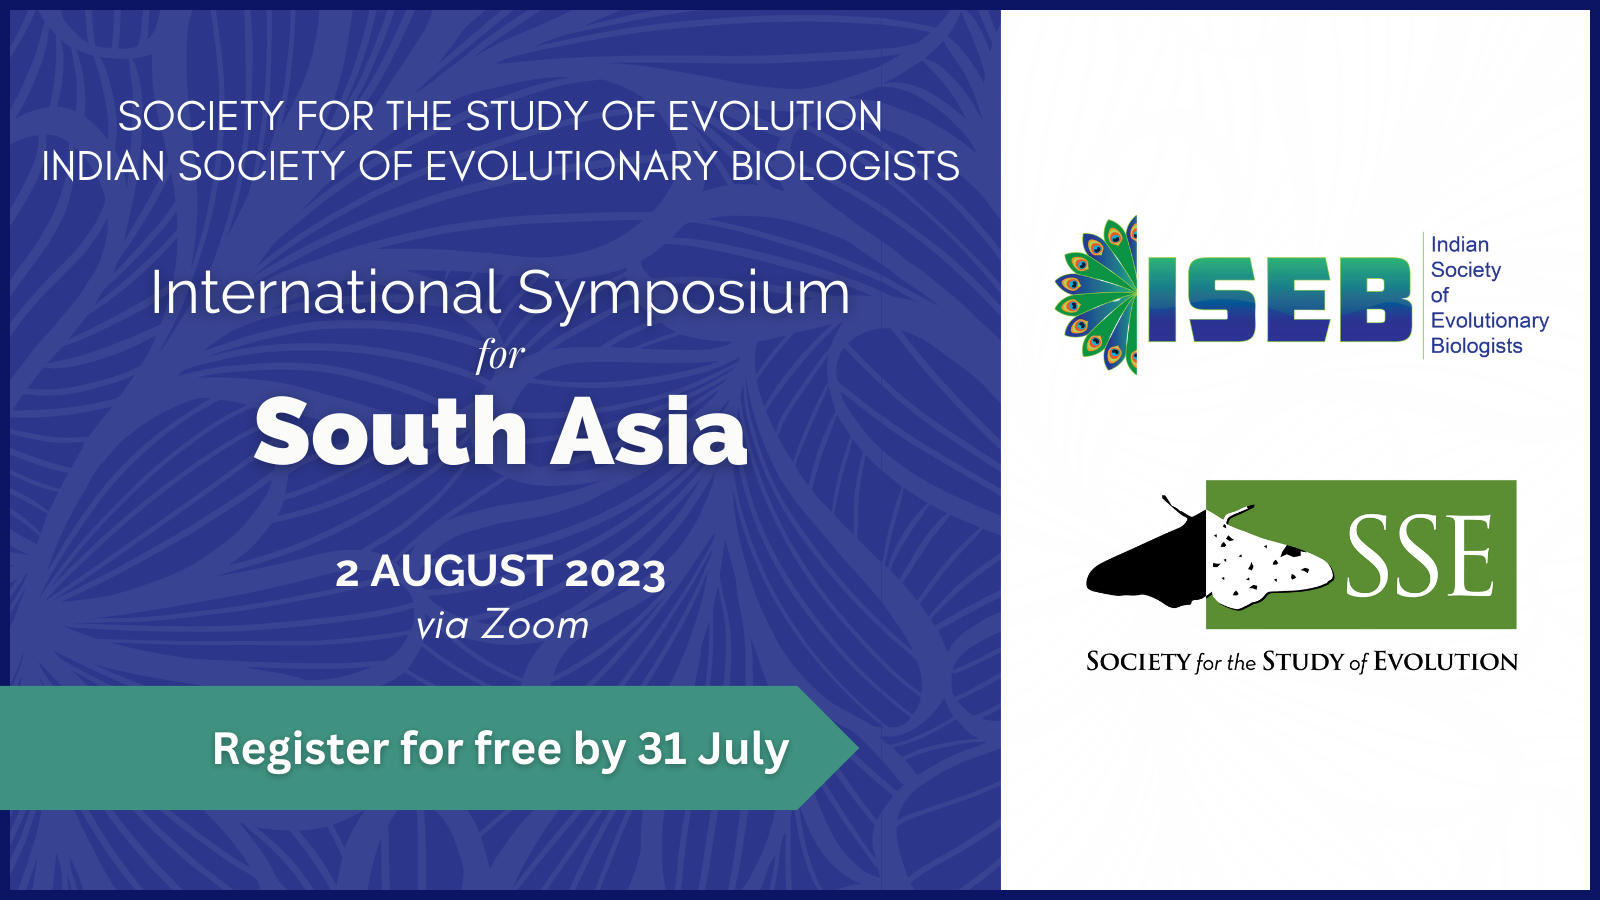 Text: Society for the Study of Evolution, Indian Society of Evolutionary Biologists, International Symposium for South Asia, 2 August 2023 via Zoom, Register for free by 31 July. Logos for ISEB and SSE.